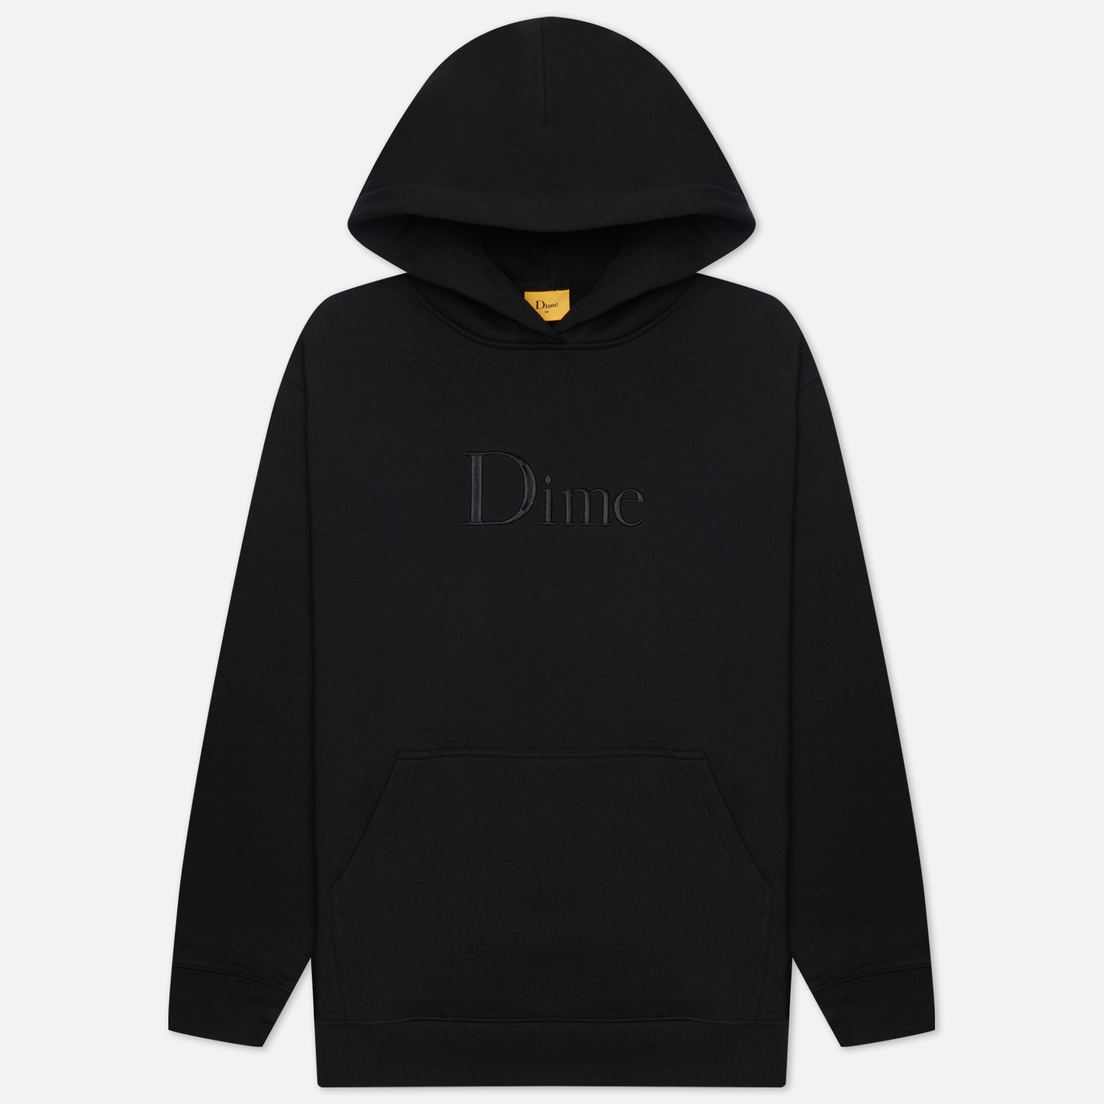 Dime Мужская толстовка Dime Classic Embroidered Hoodie